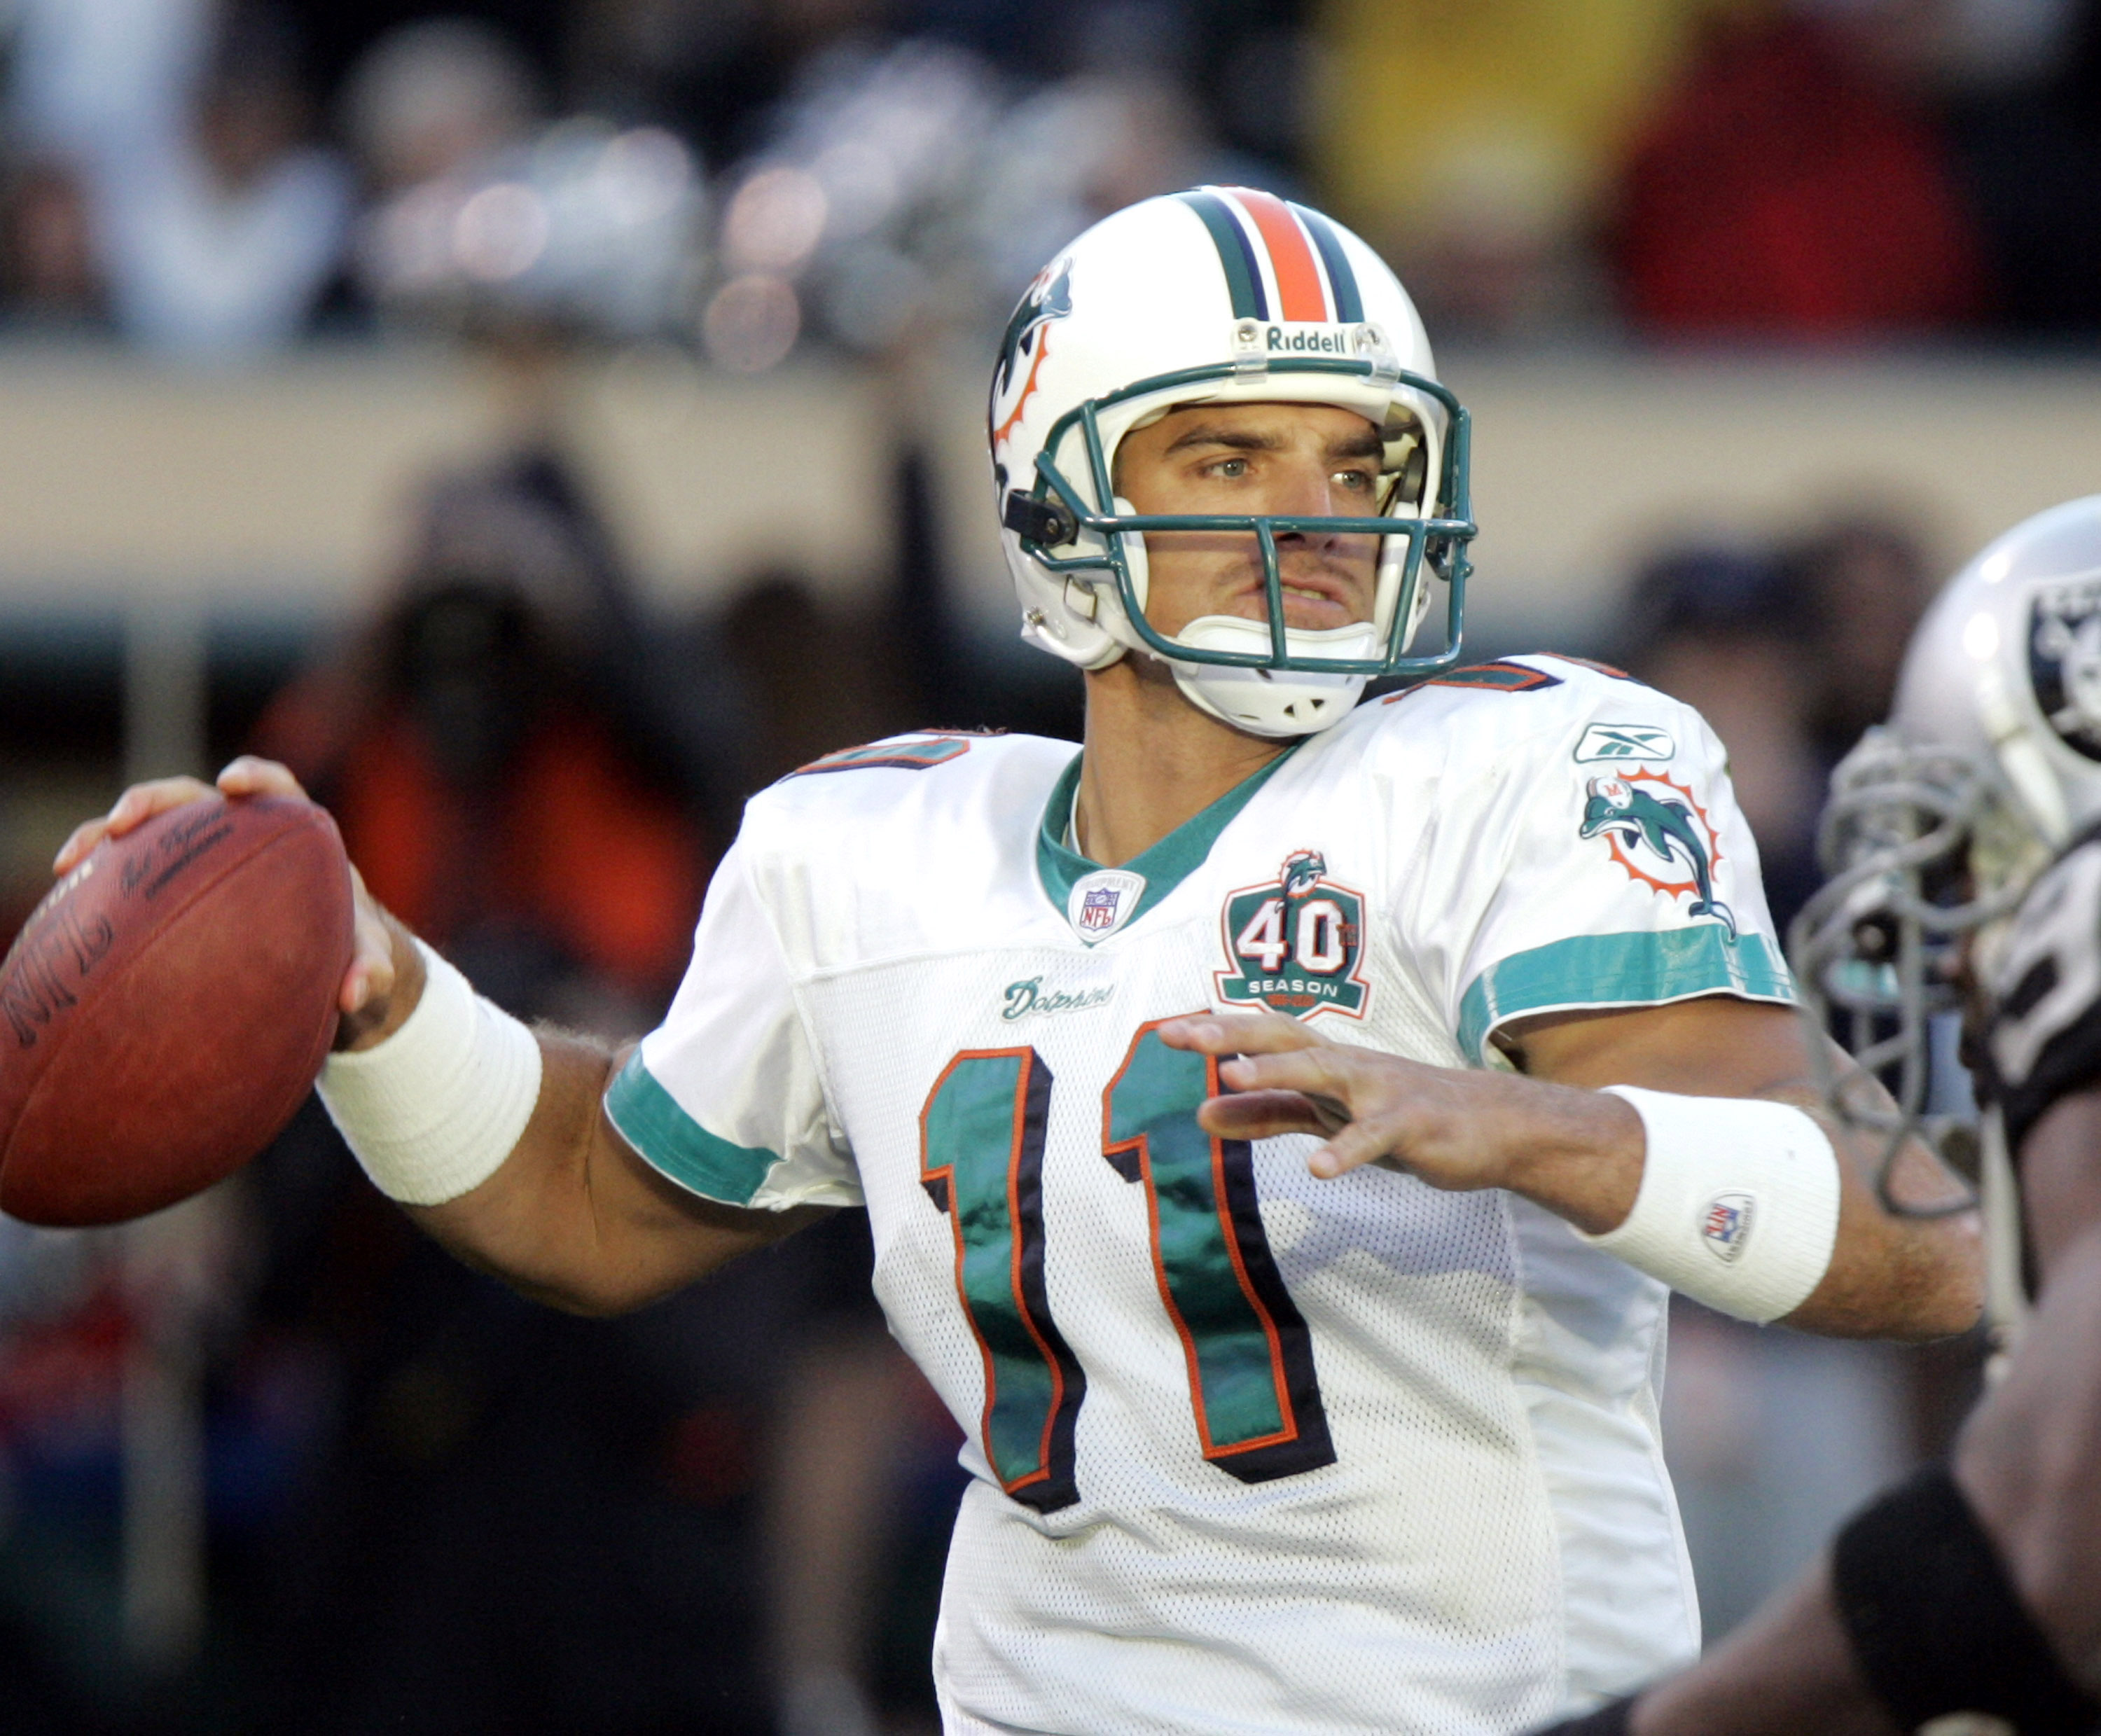 Gus Frerotte scanning the field during a Dolphins game